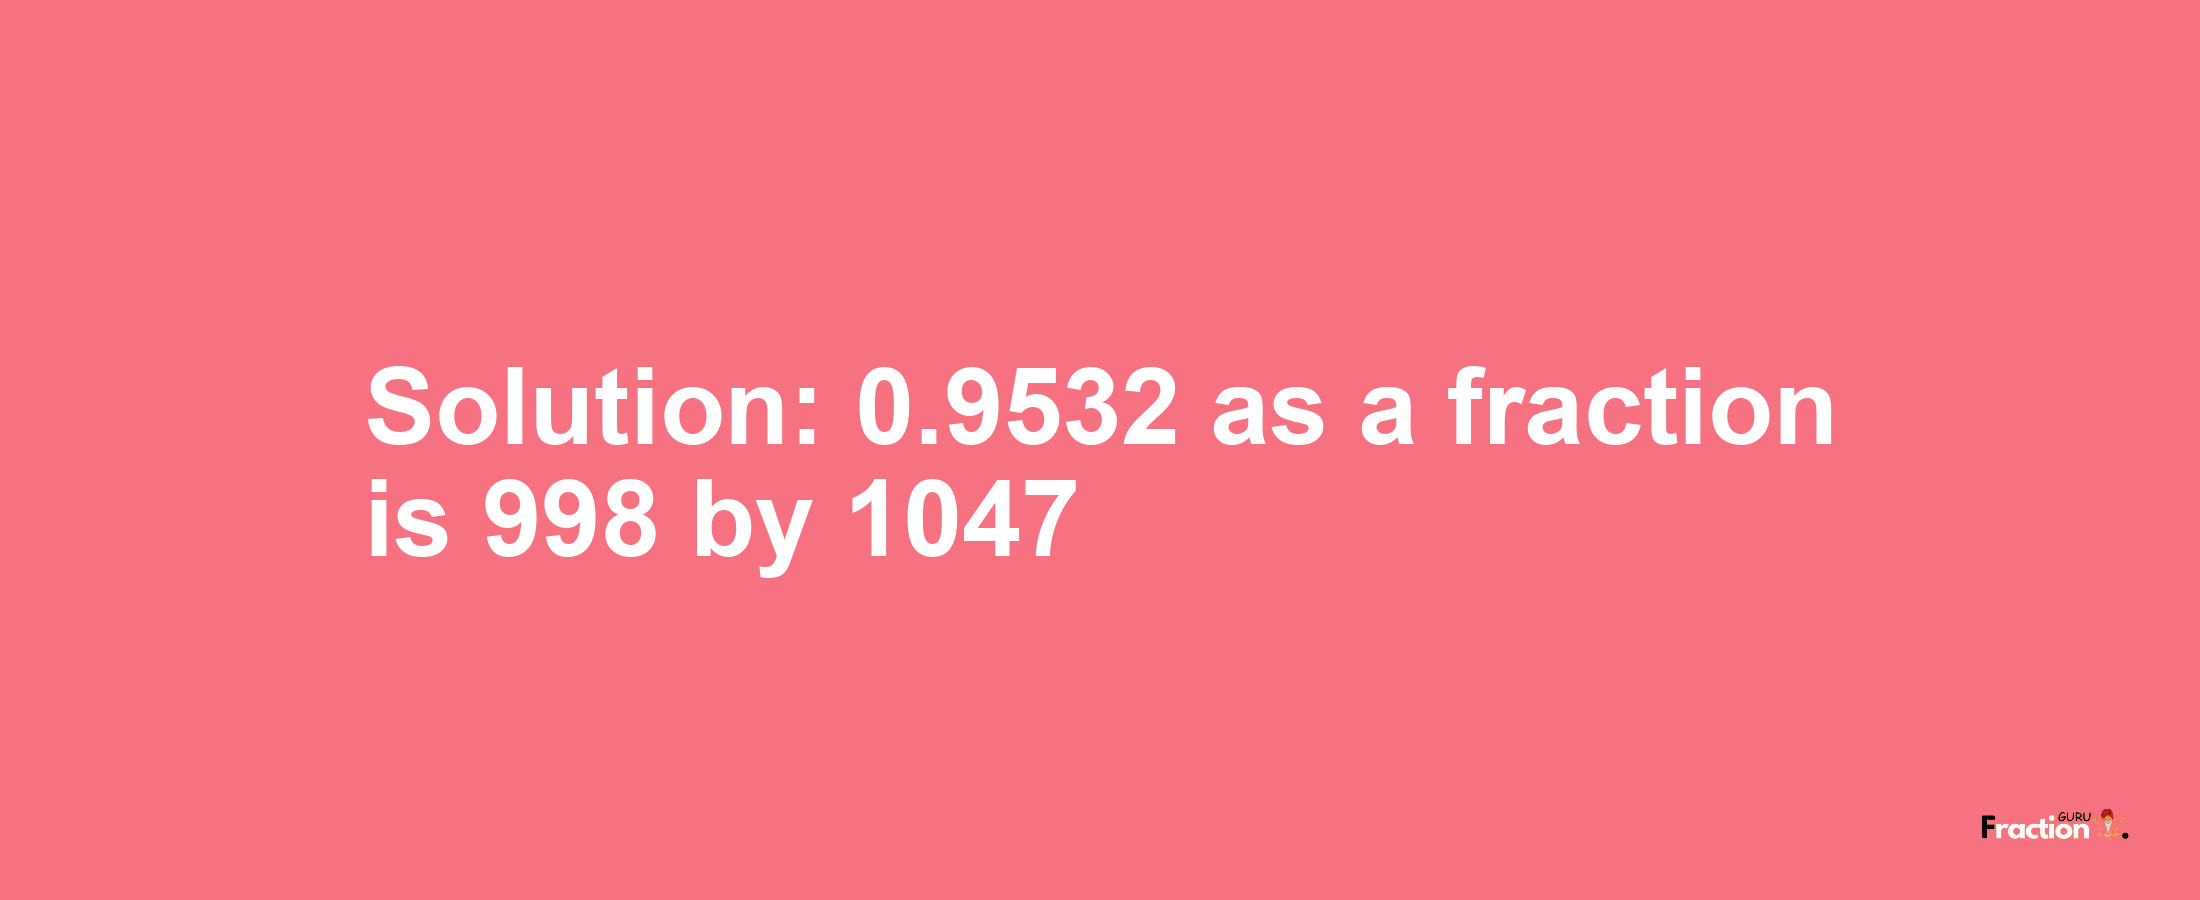 Solution:0.9532 as a fraction is 998/1047